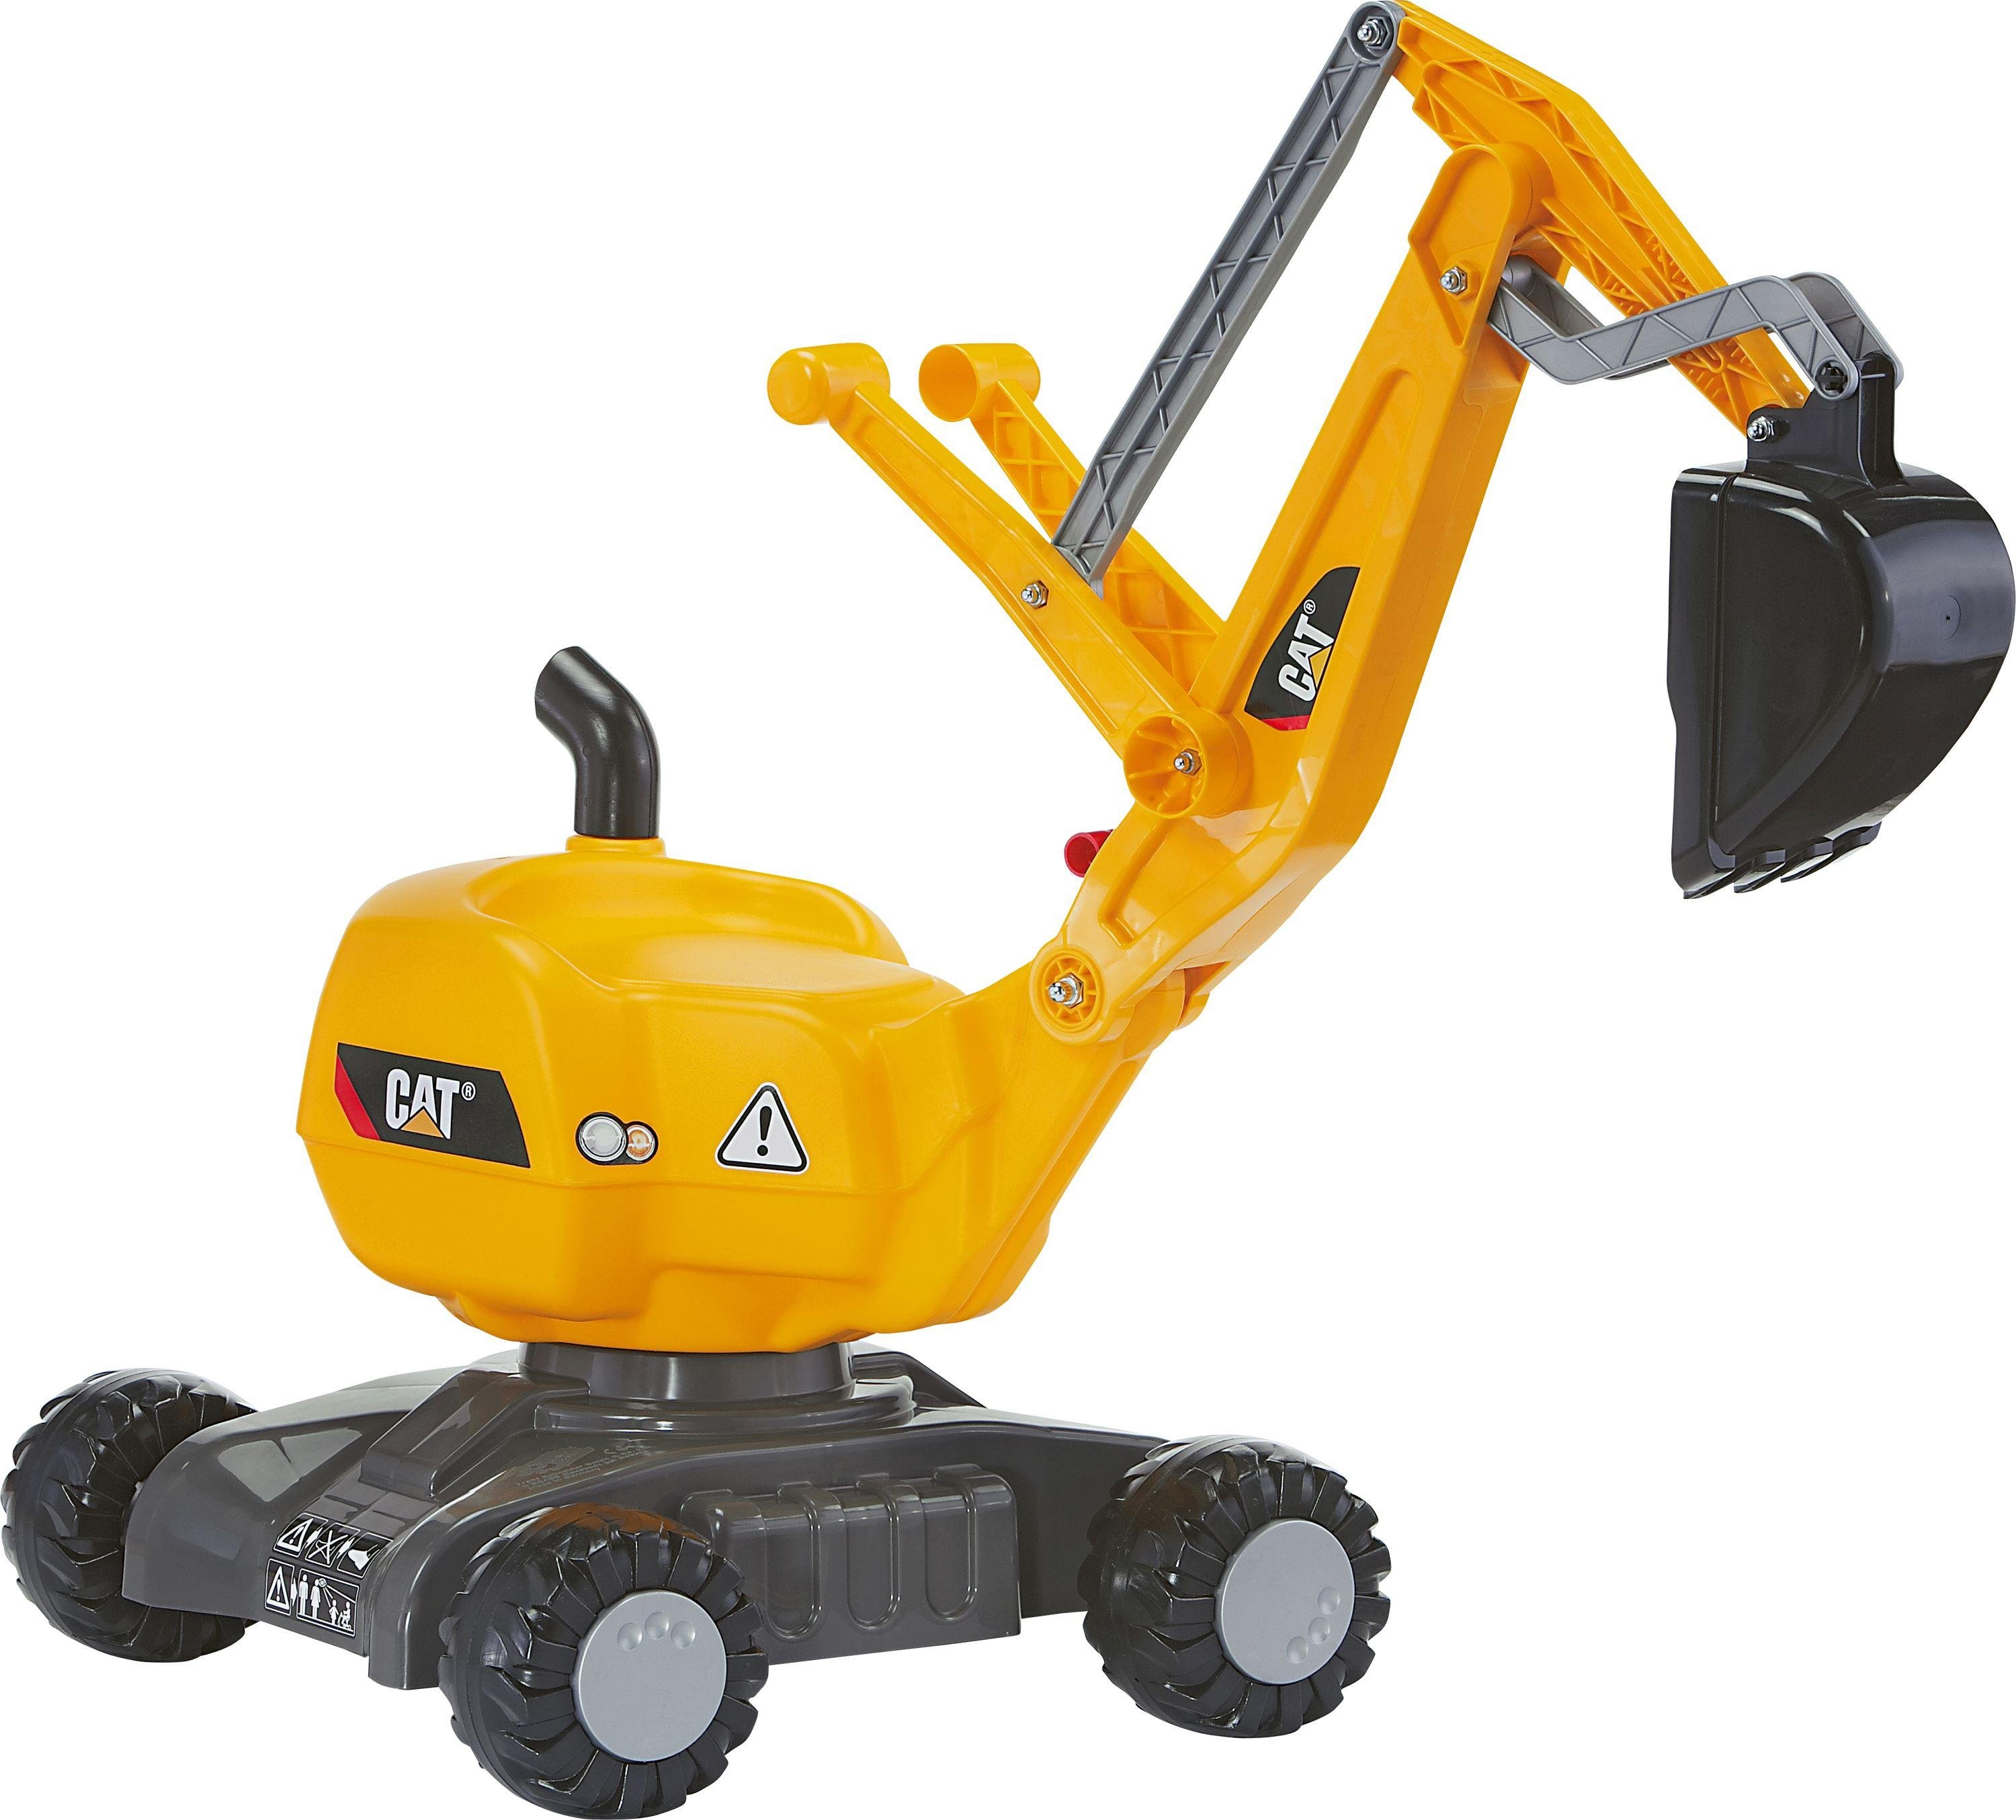 CAT Mobile Sit On Kids Excavator review